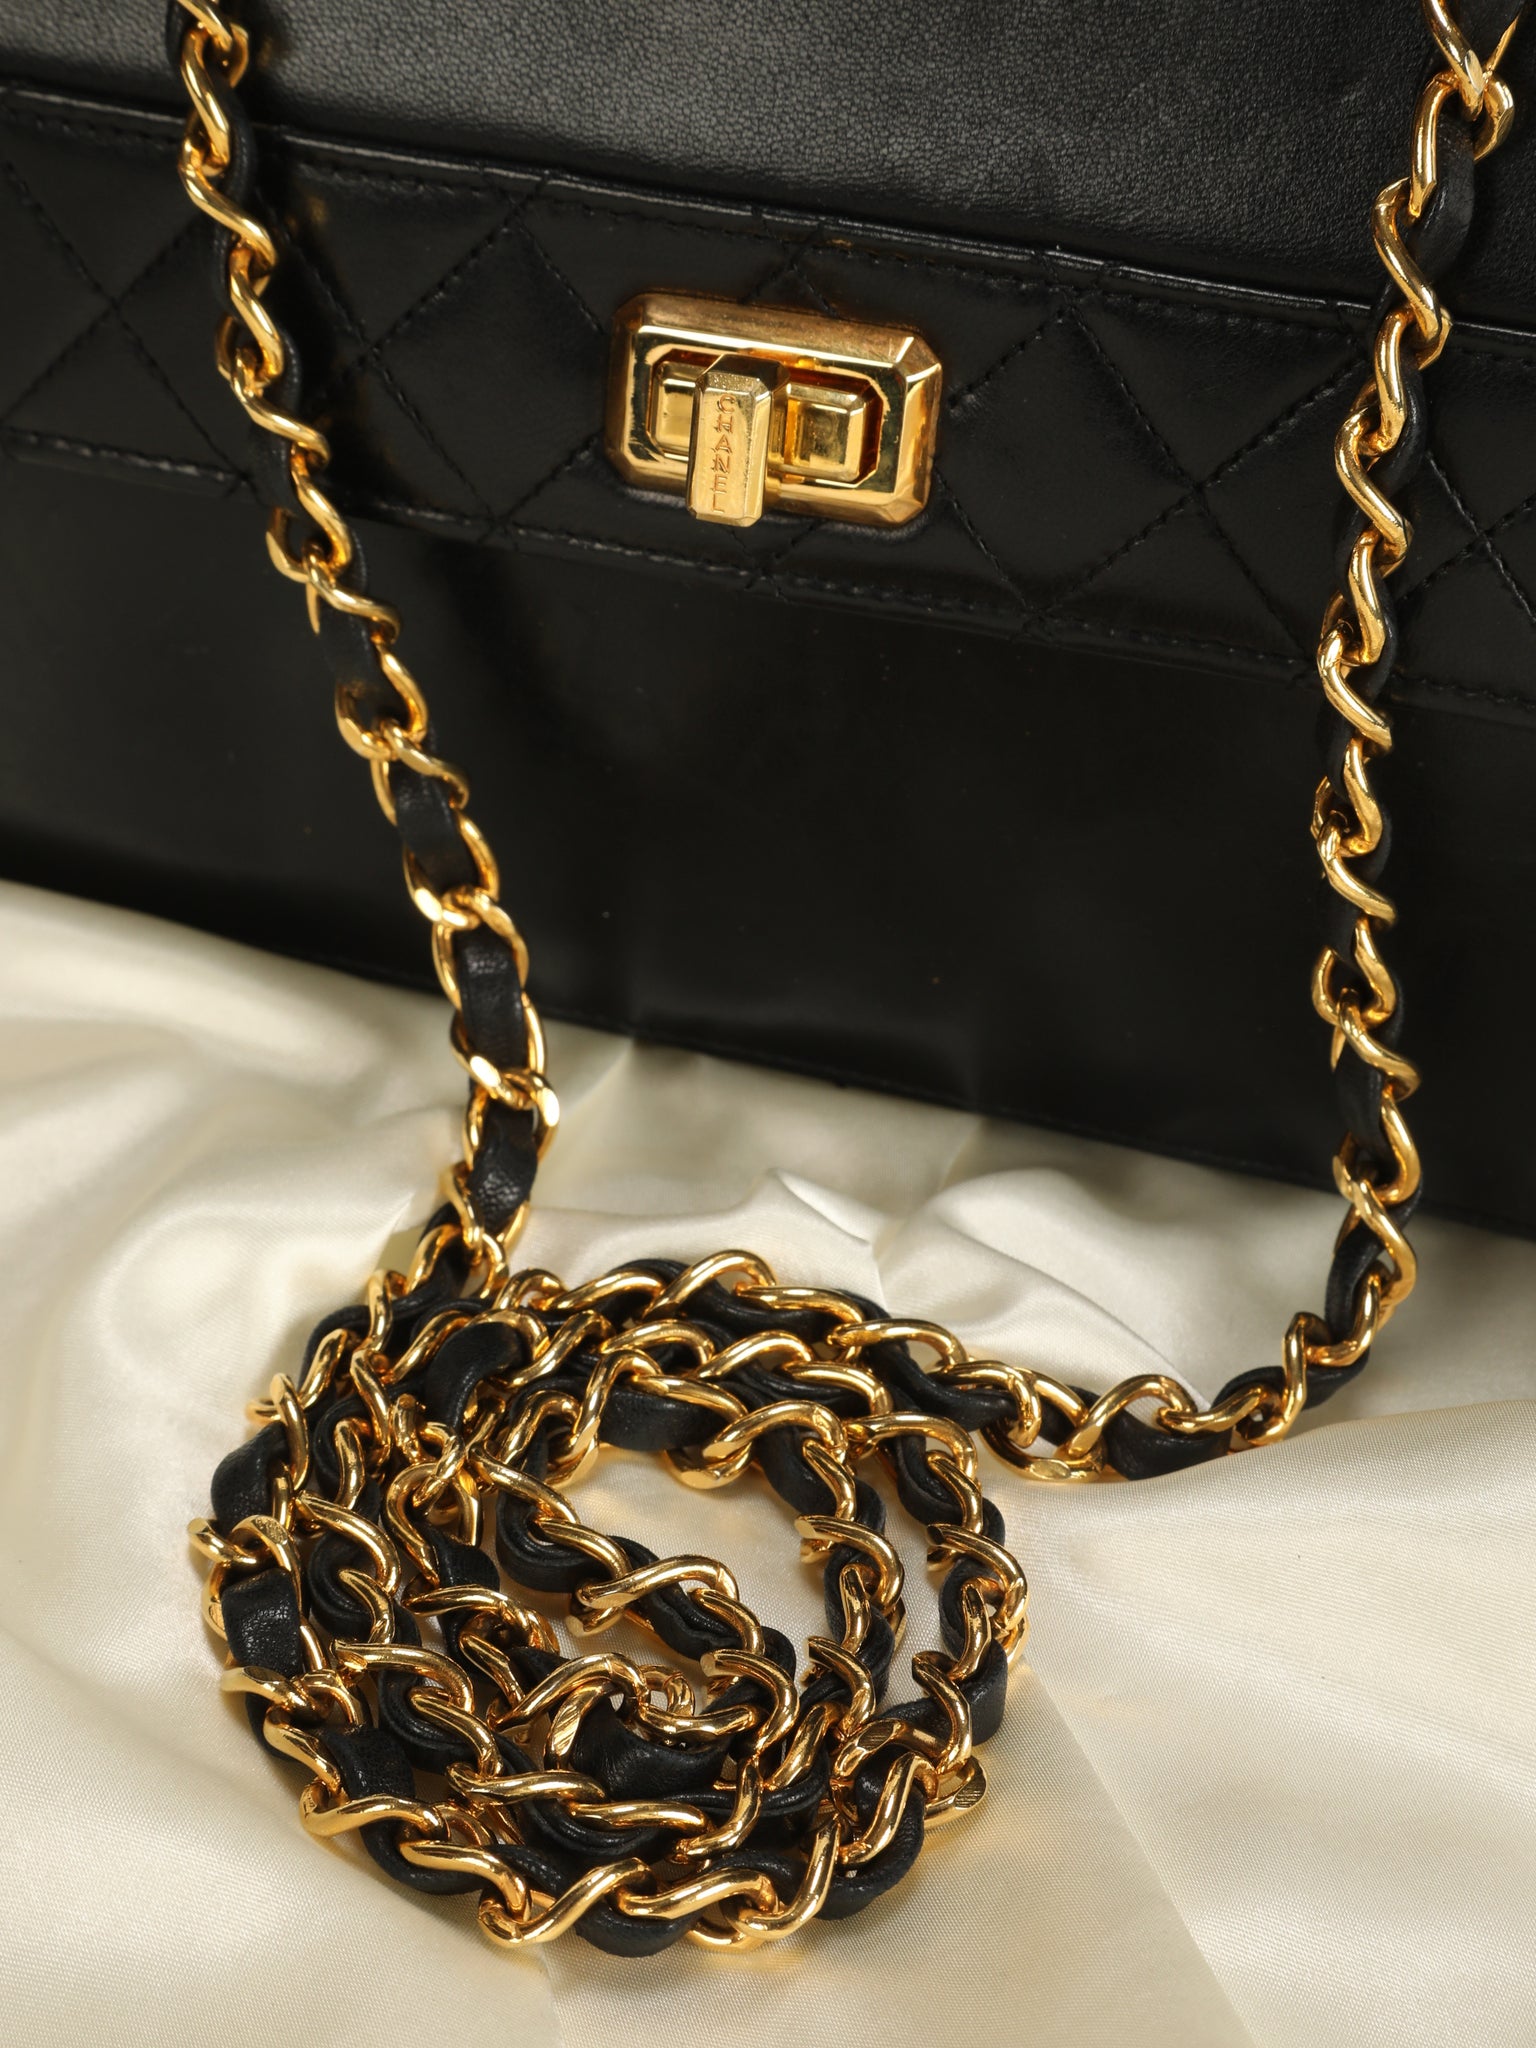 Chanel Vintage Mademoiselle Lock Trapezoid Flap Bag Quilted